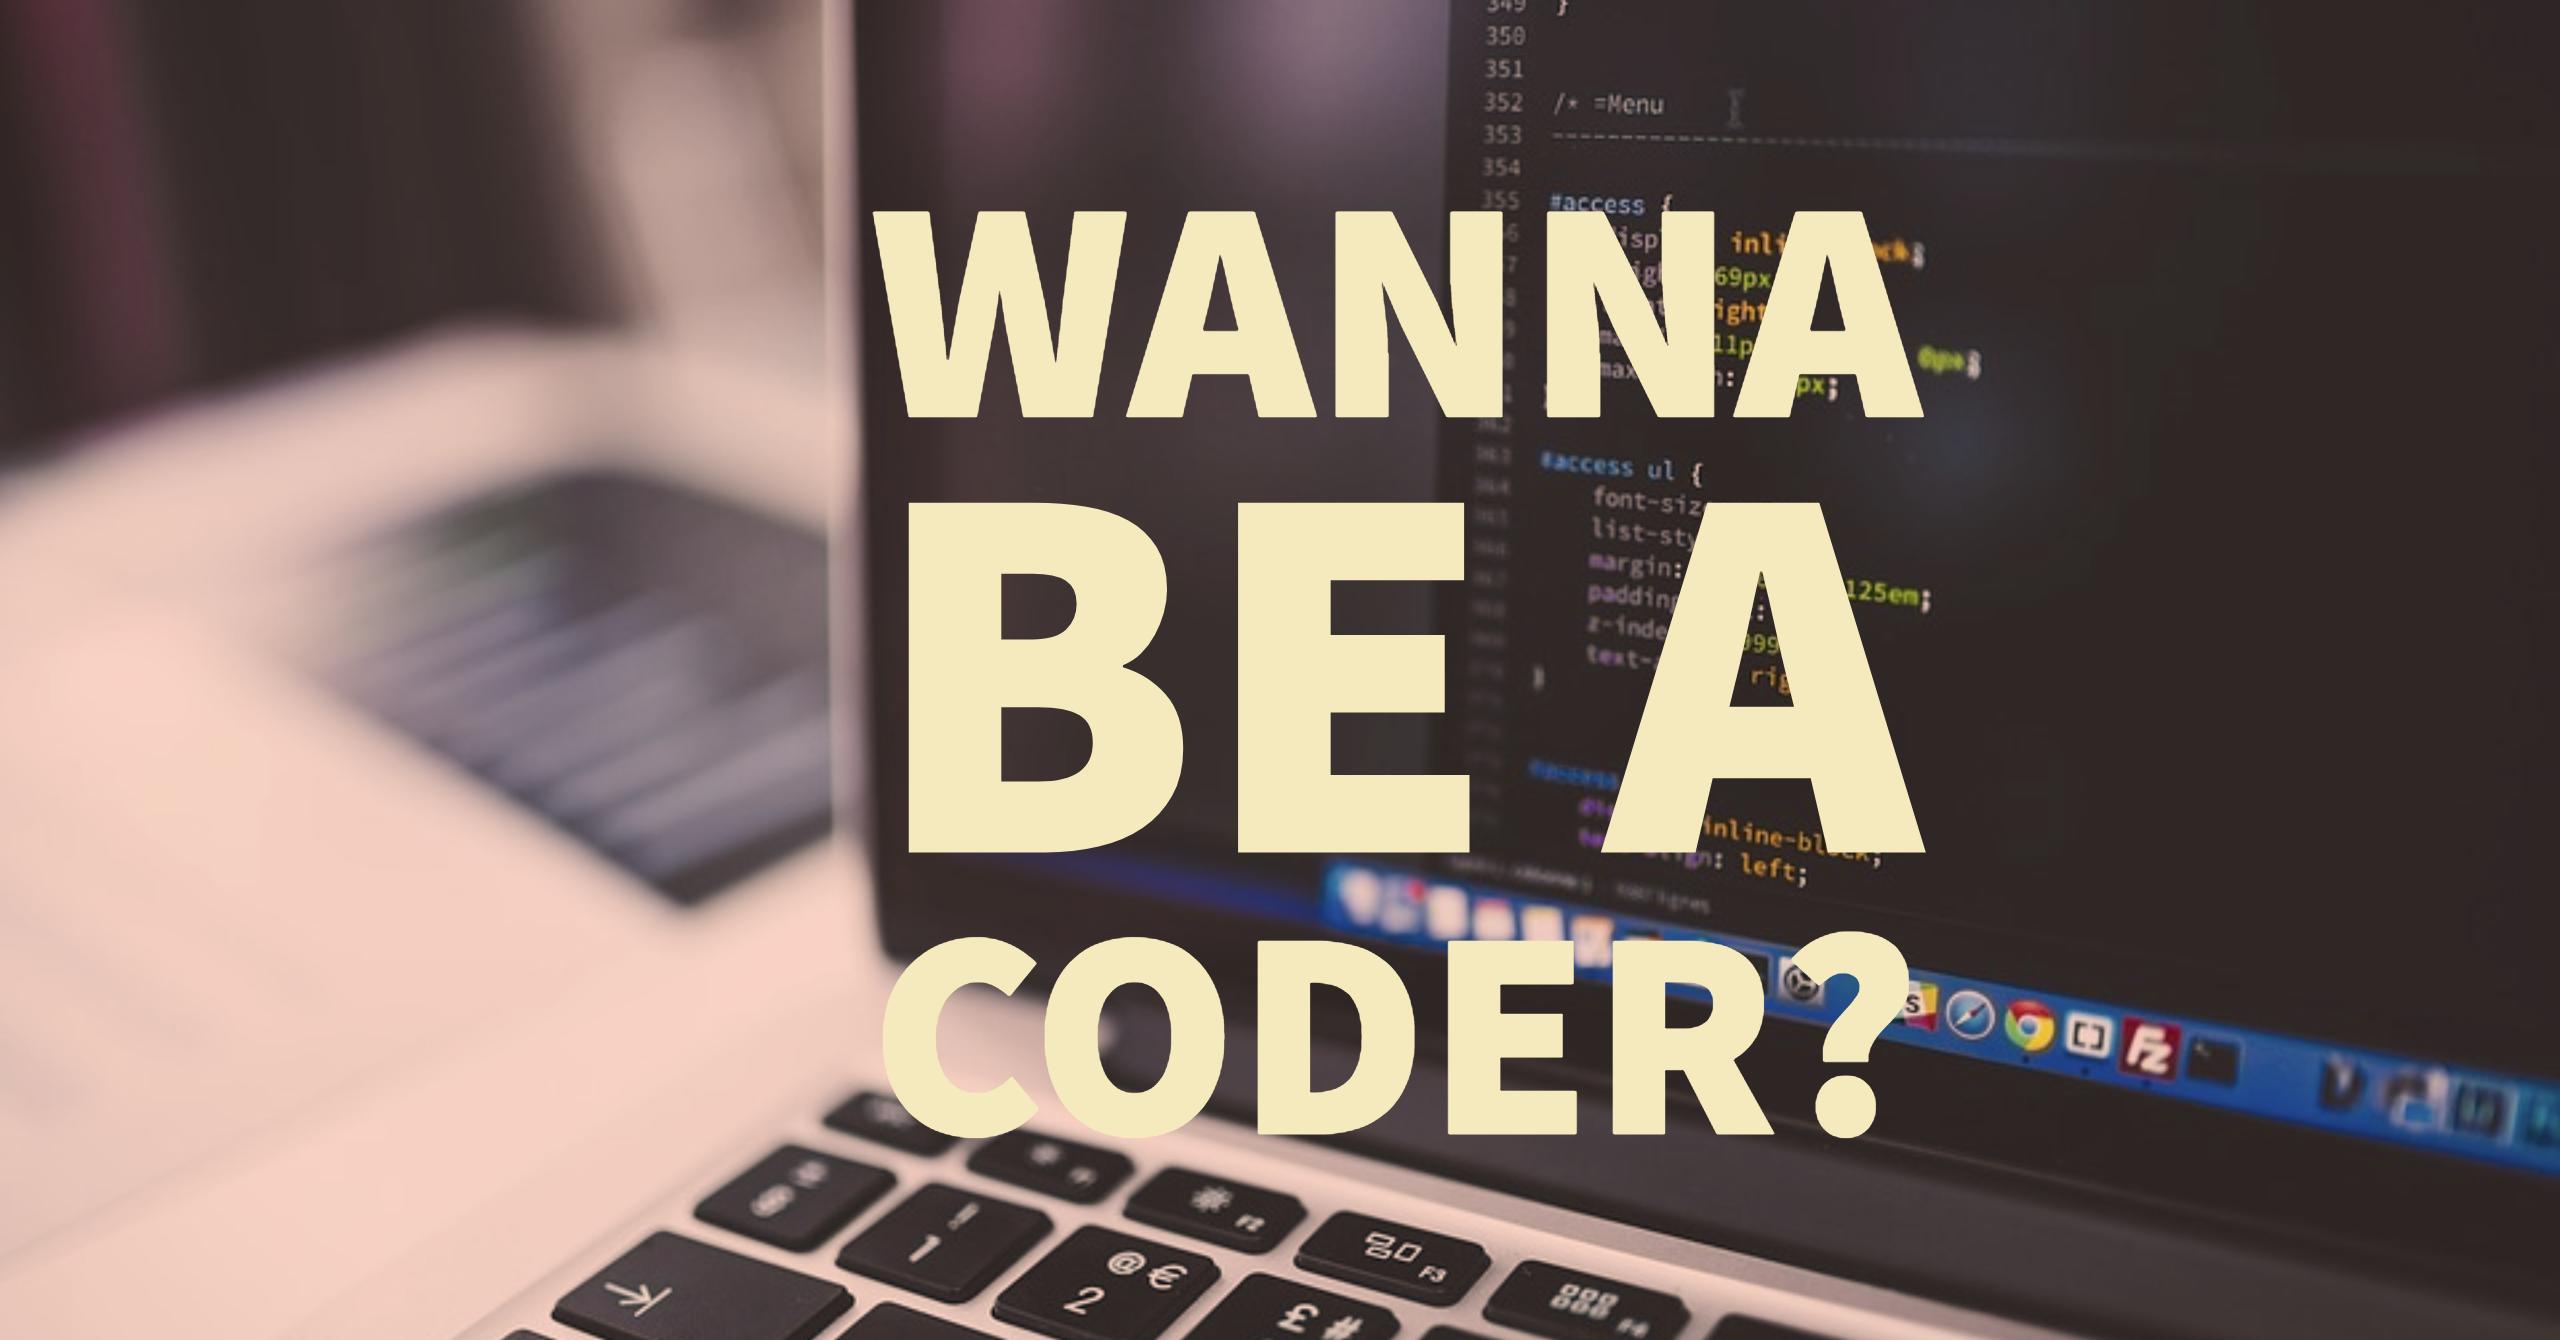 So You Want To Become a Coder?